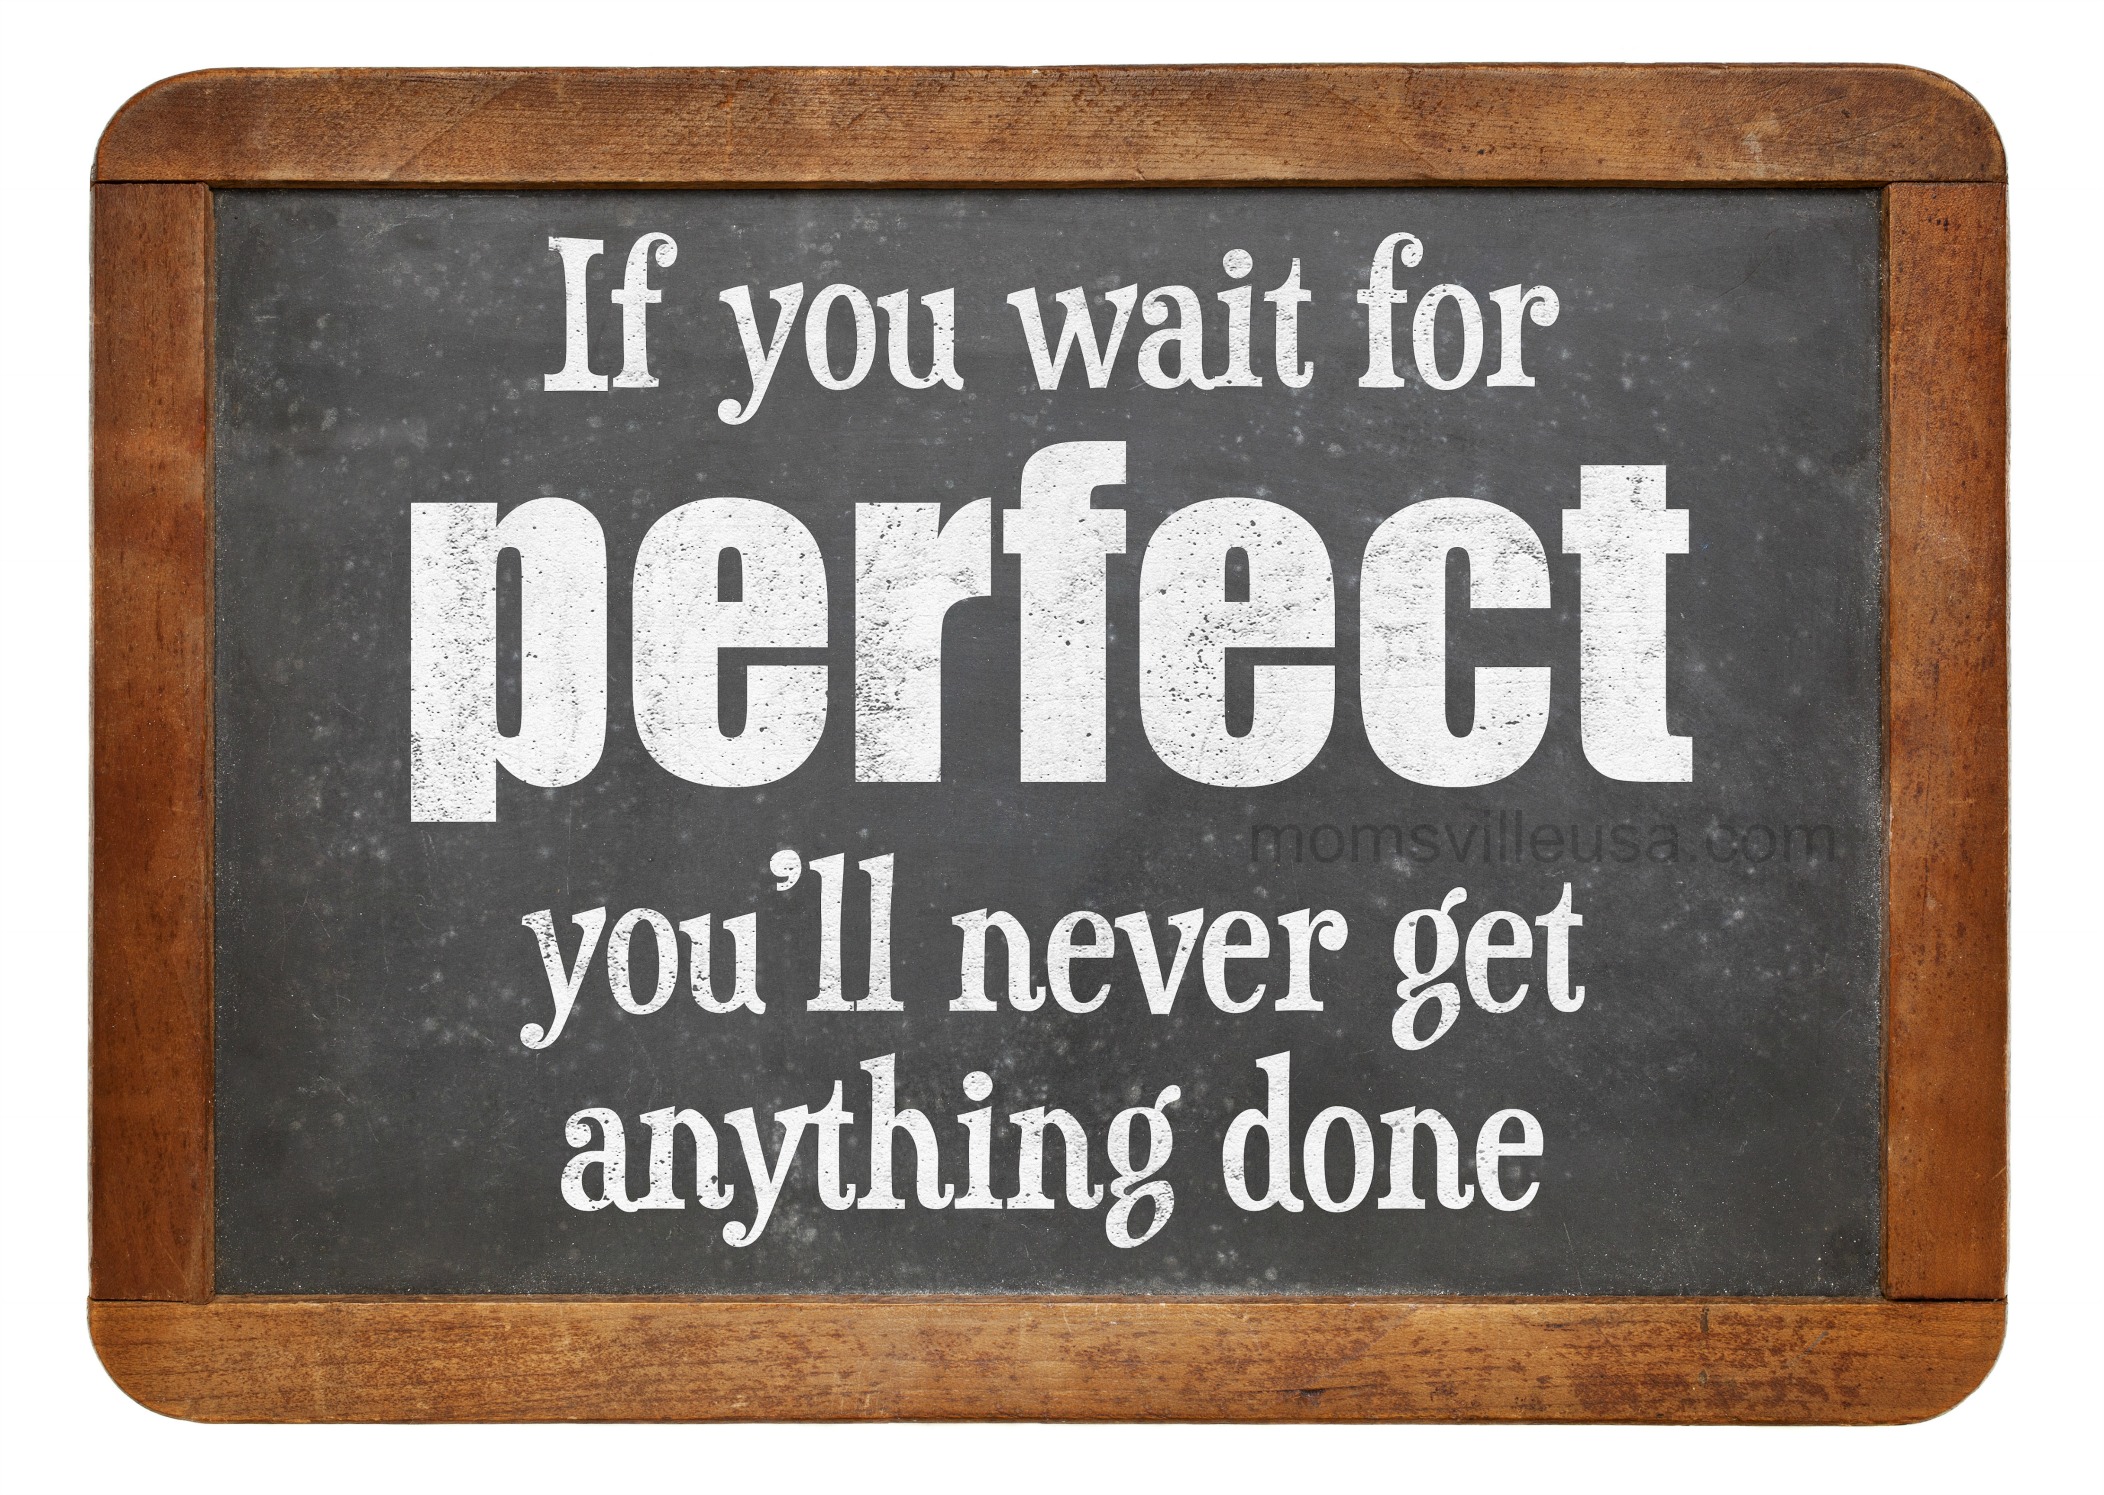 Perfectionism and Procrastination-The Inability to Get Things Done